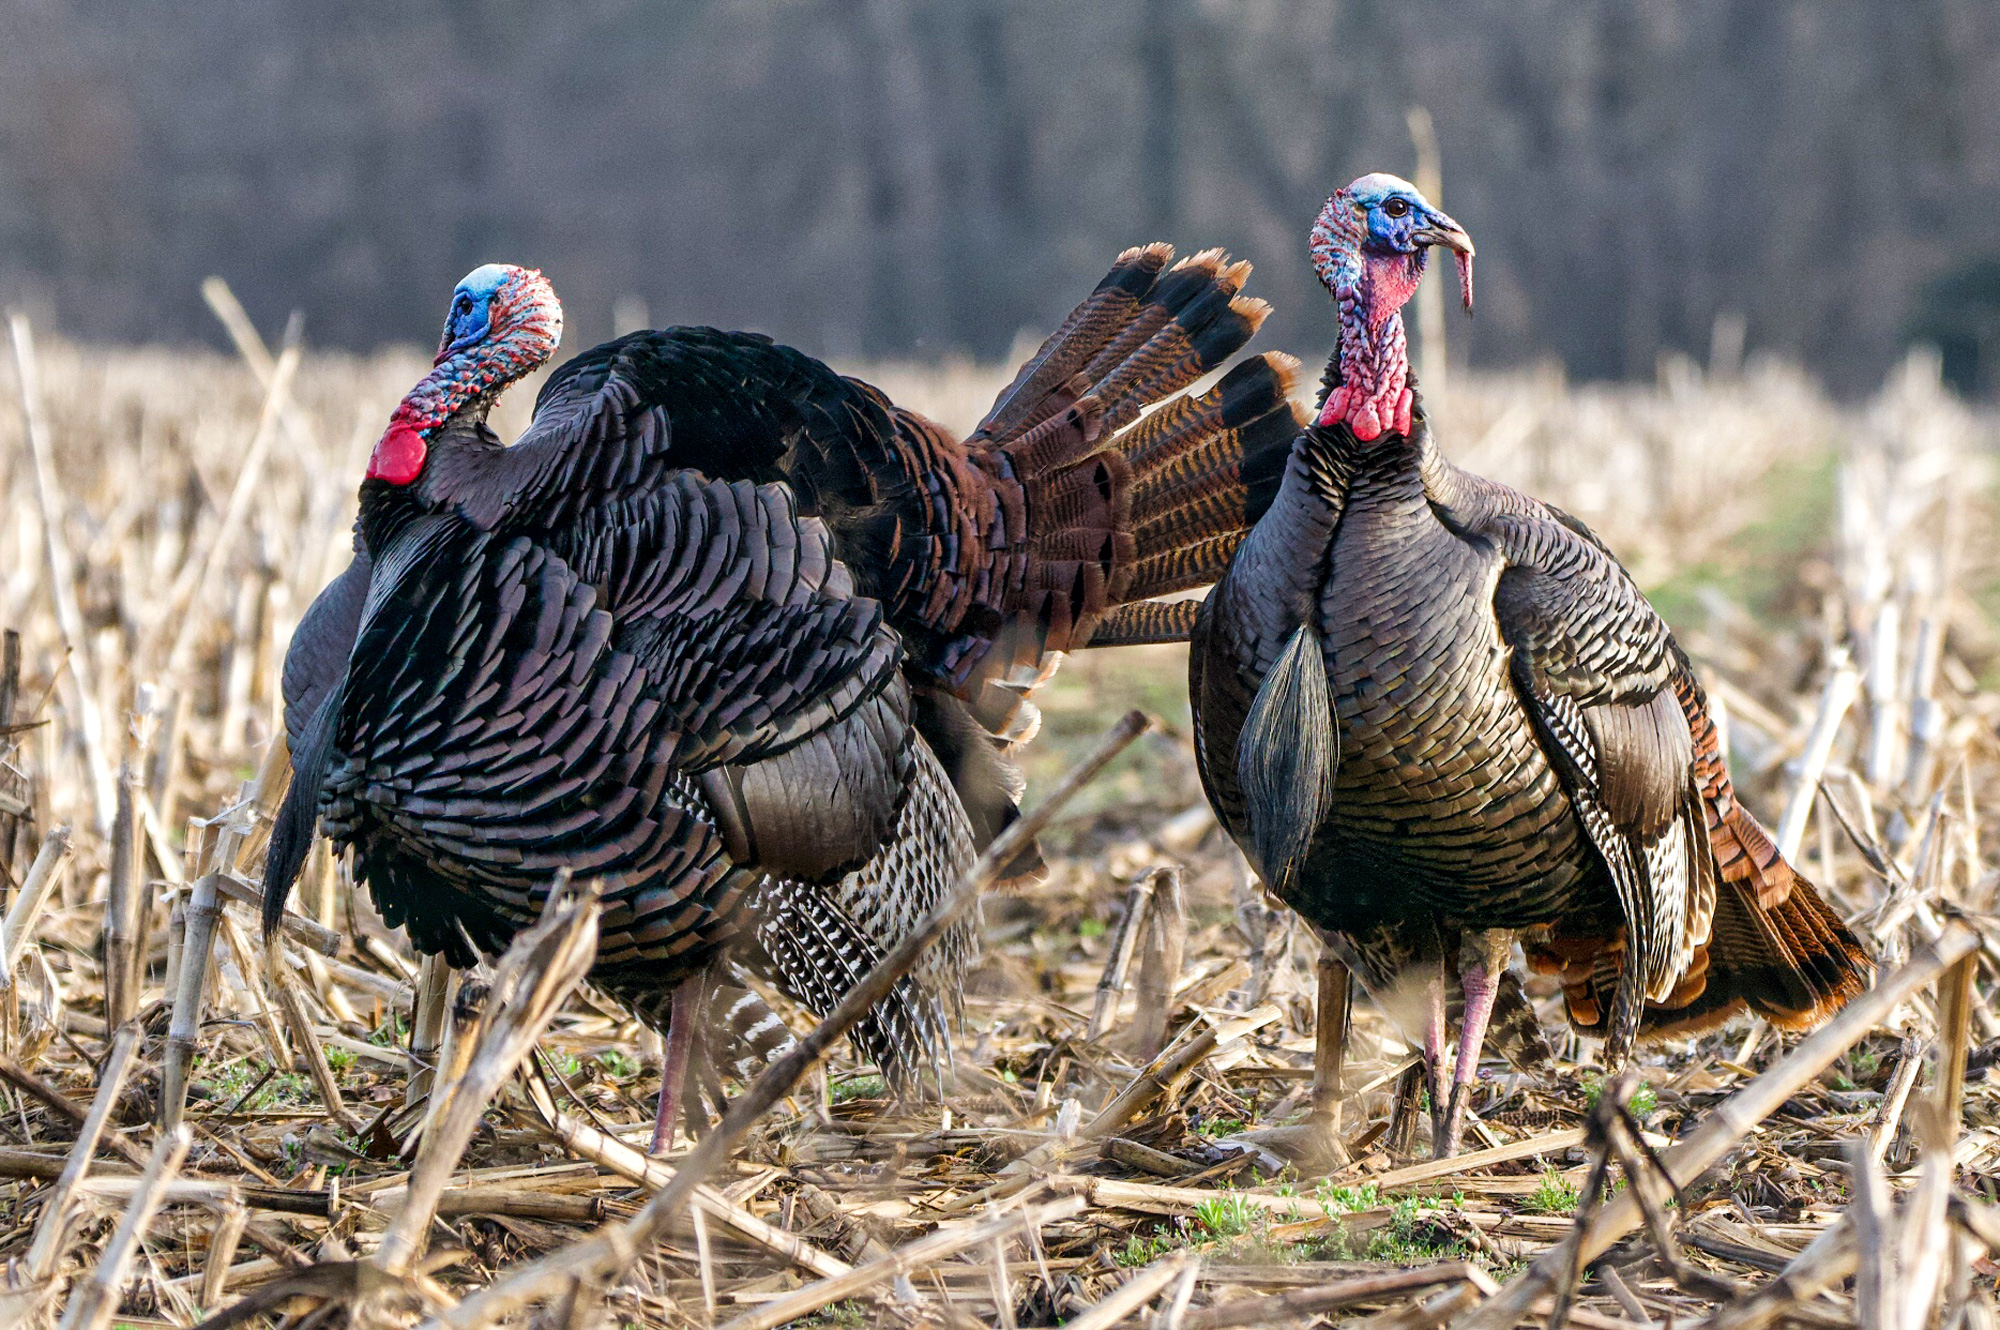 A Week to Remember - The National Wild Turkey Federation